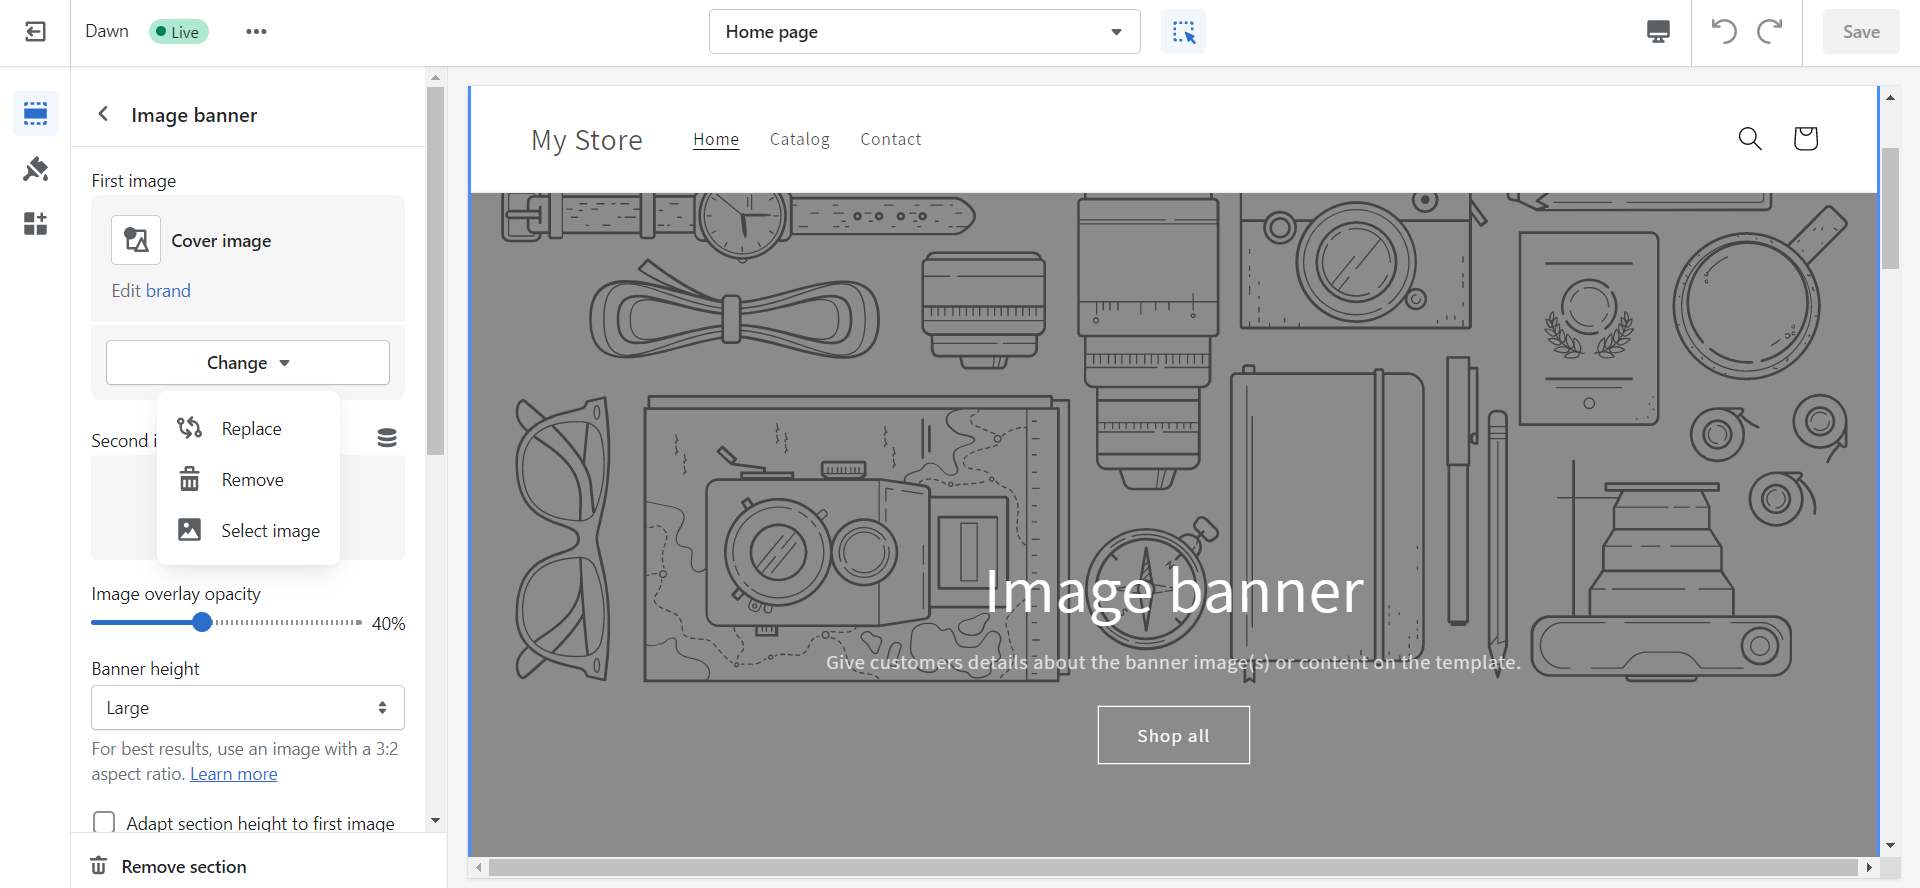 Shopify Image Banners